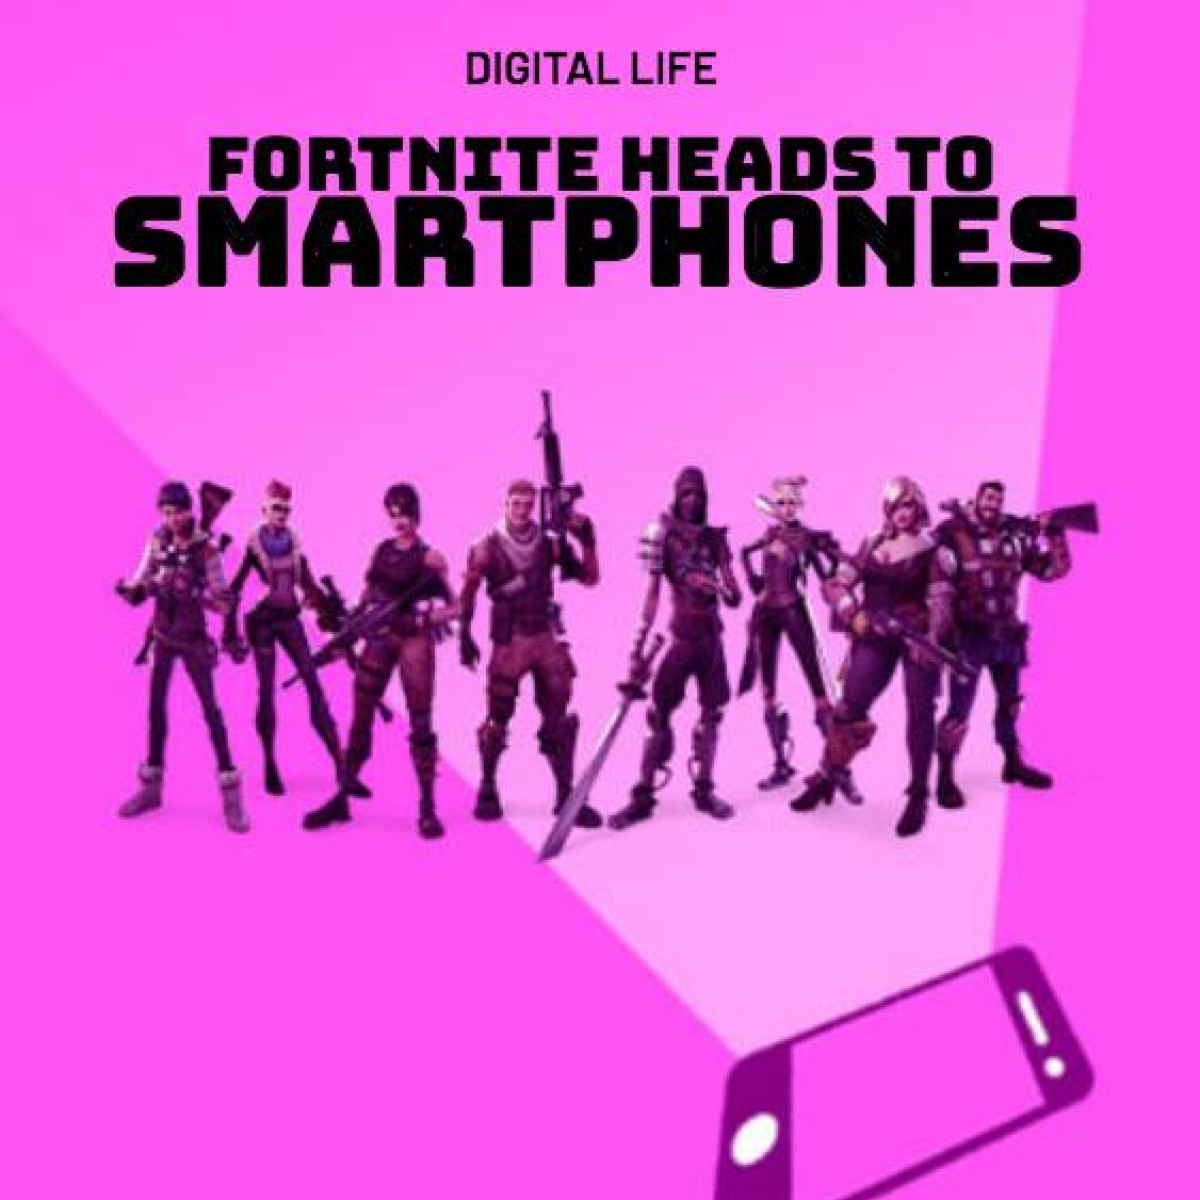 Music industry takes aim at Fortnite over song royalties, Music industry